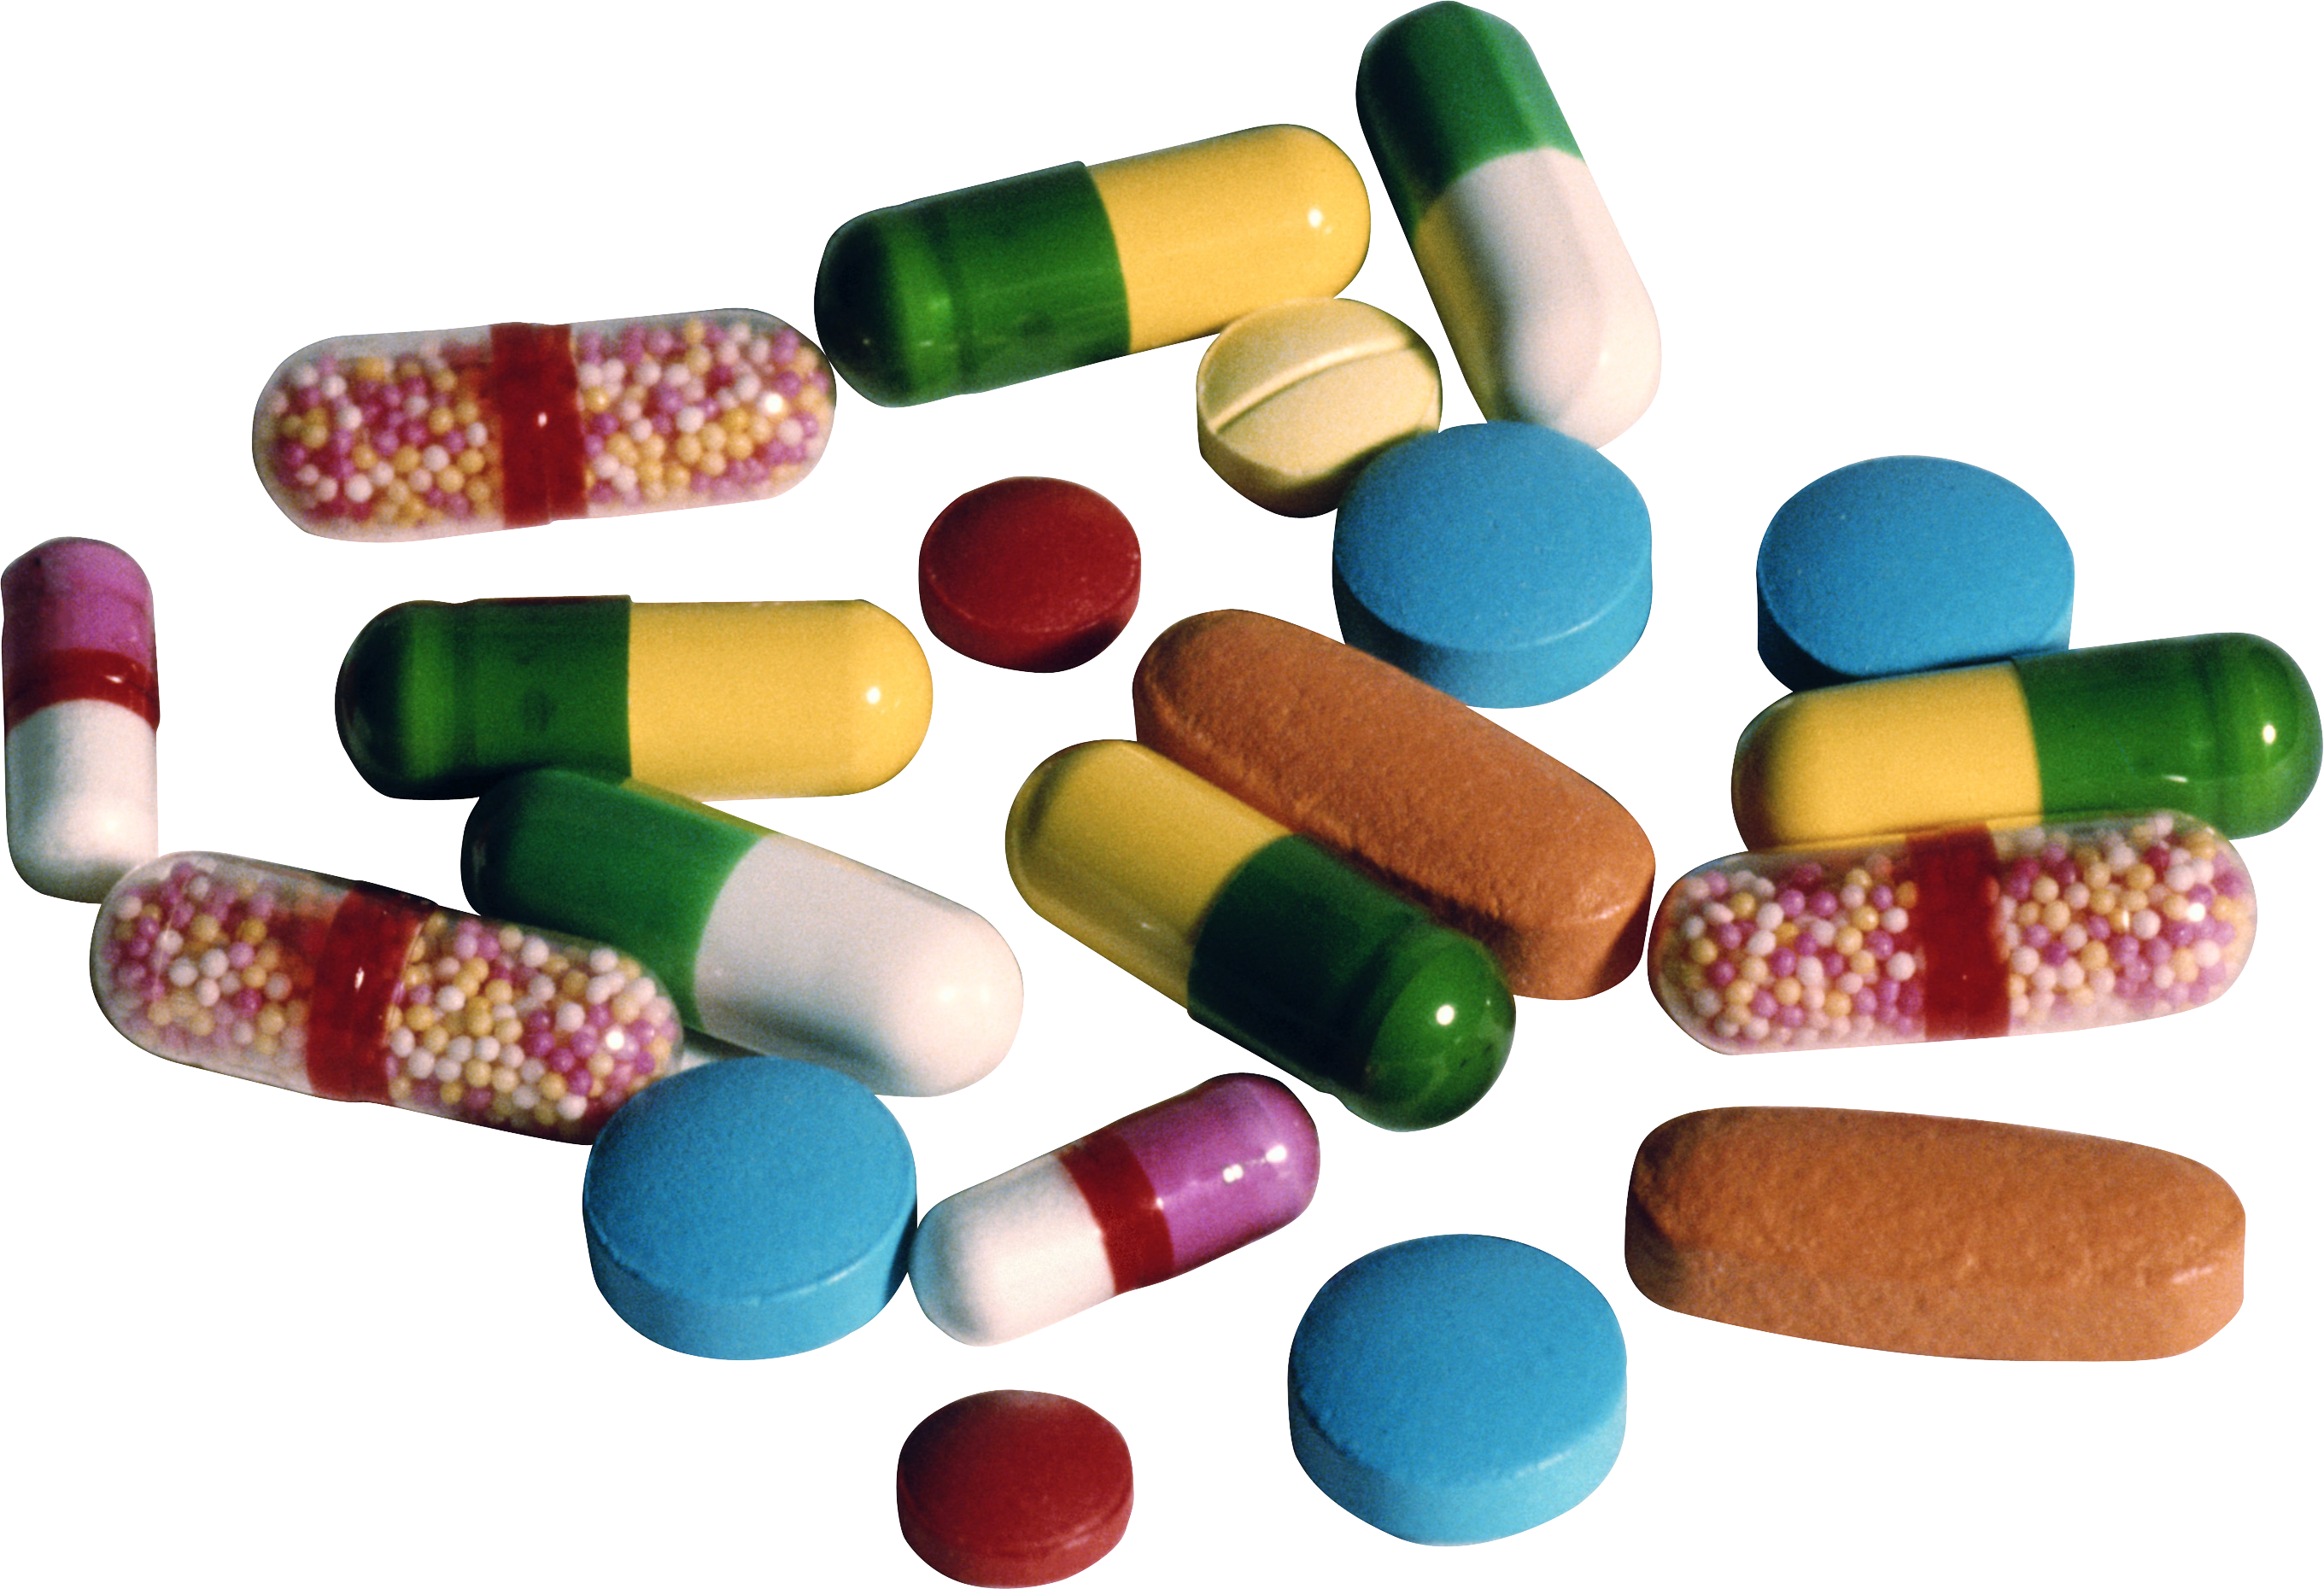 A Group Of Pills And Capsules